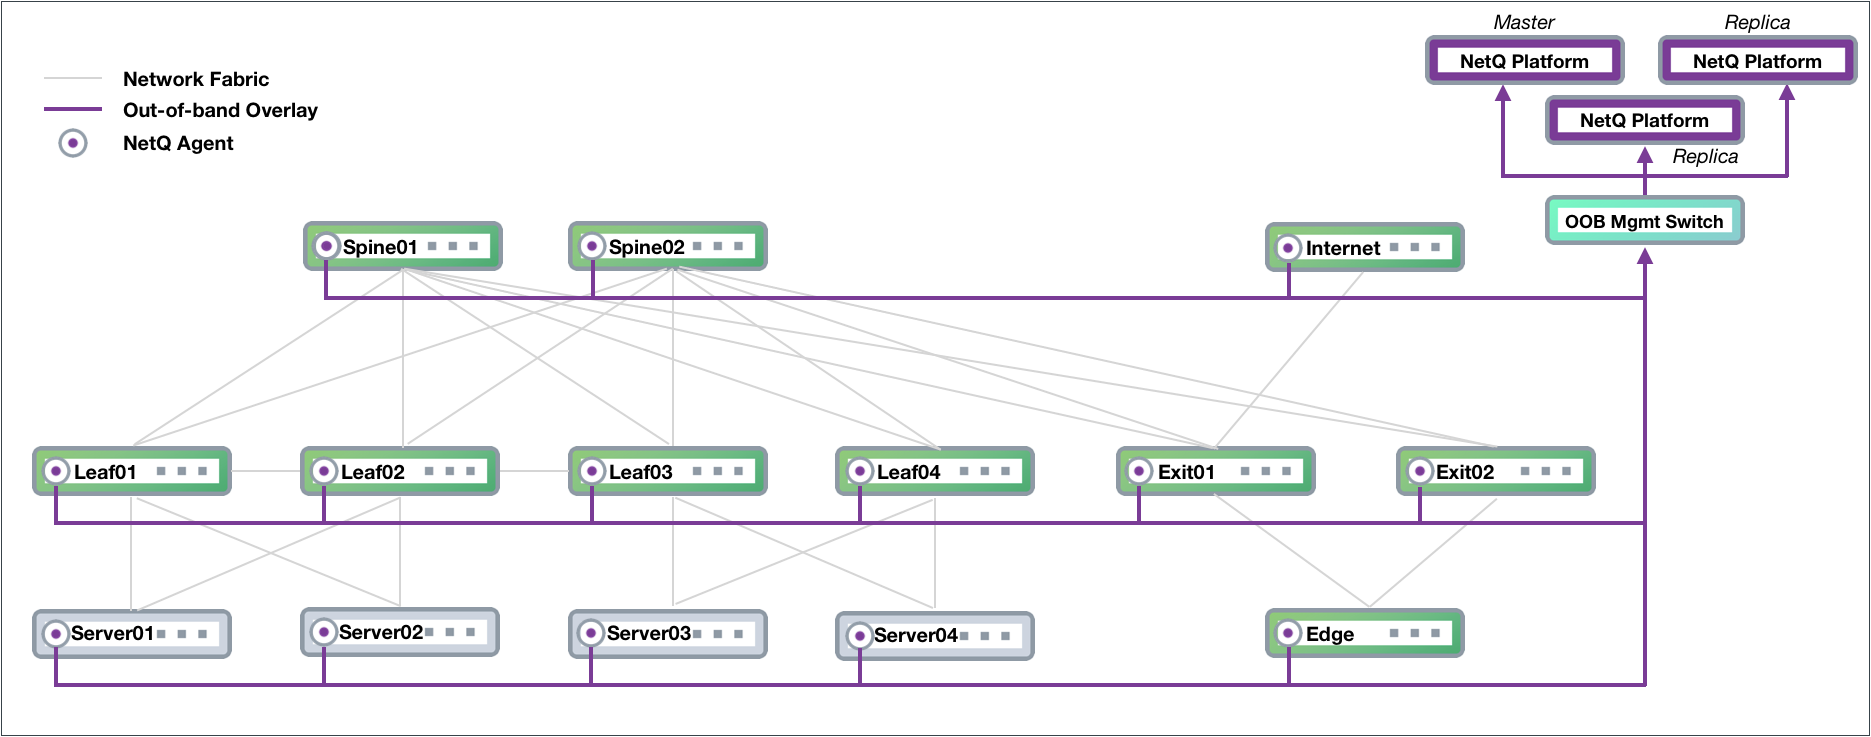 diagram of a server cluster deployment with one master and two worker NetQ platforms.